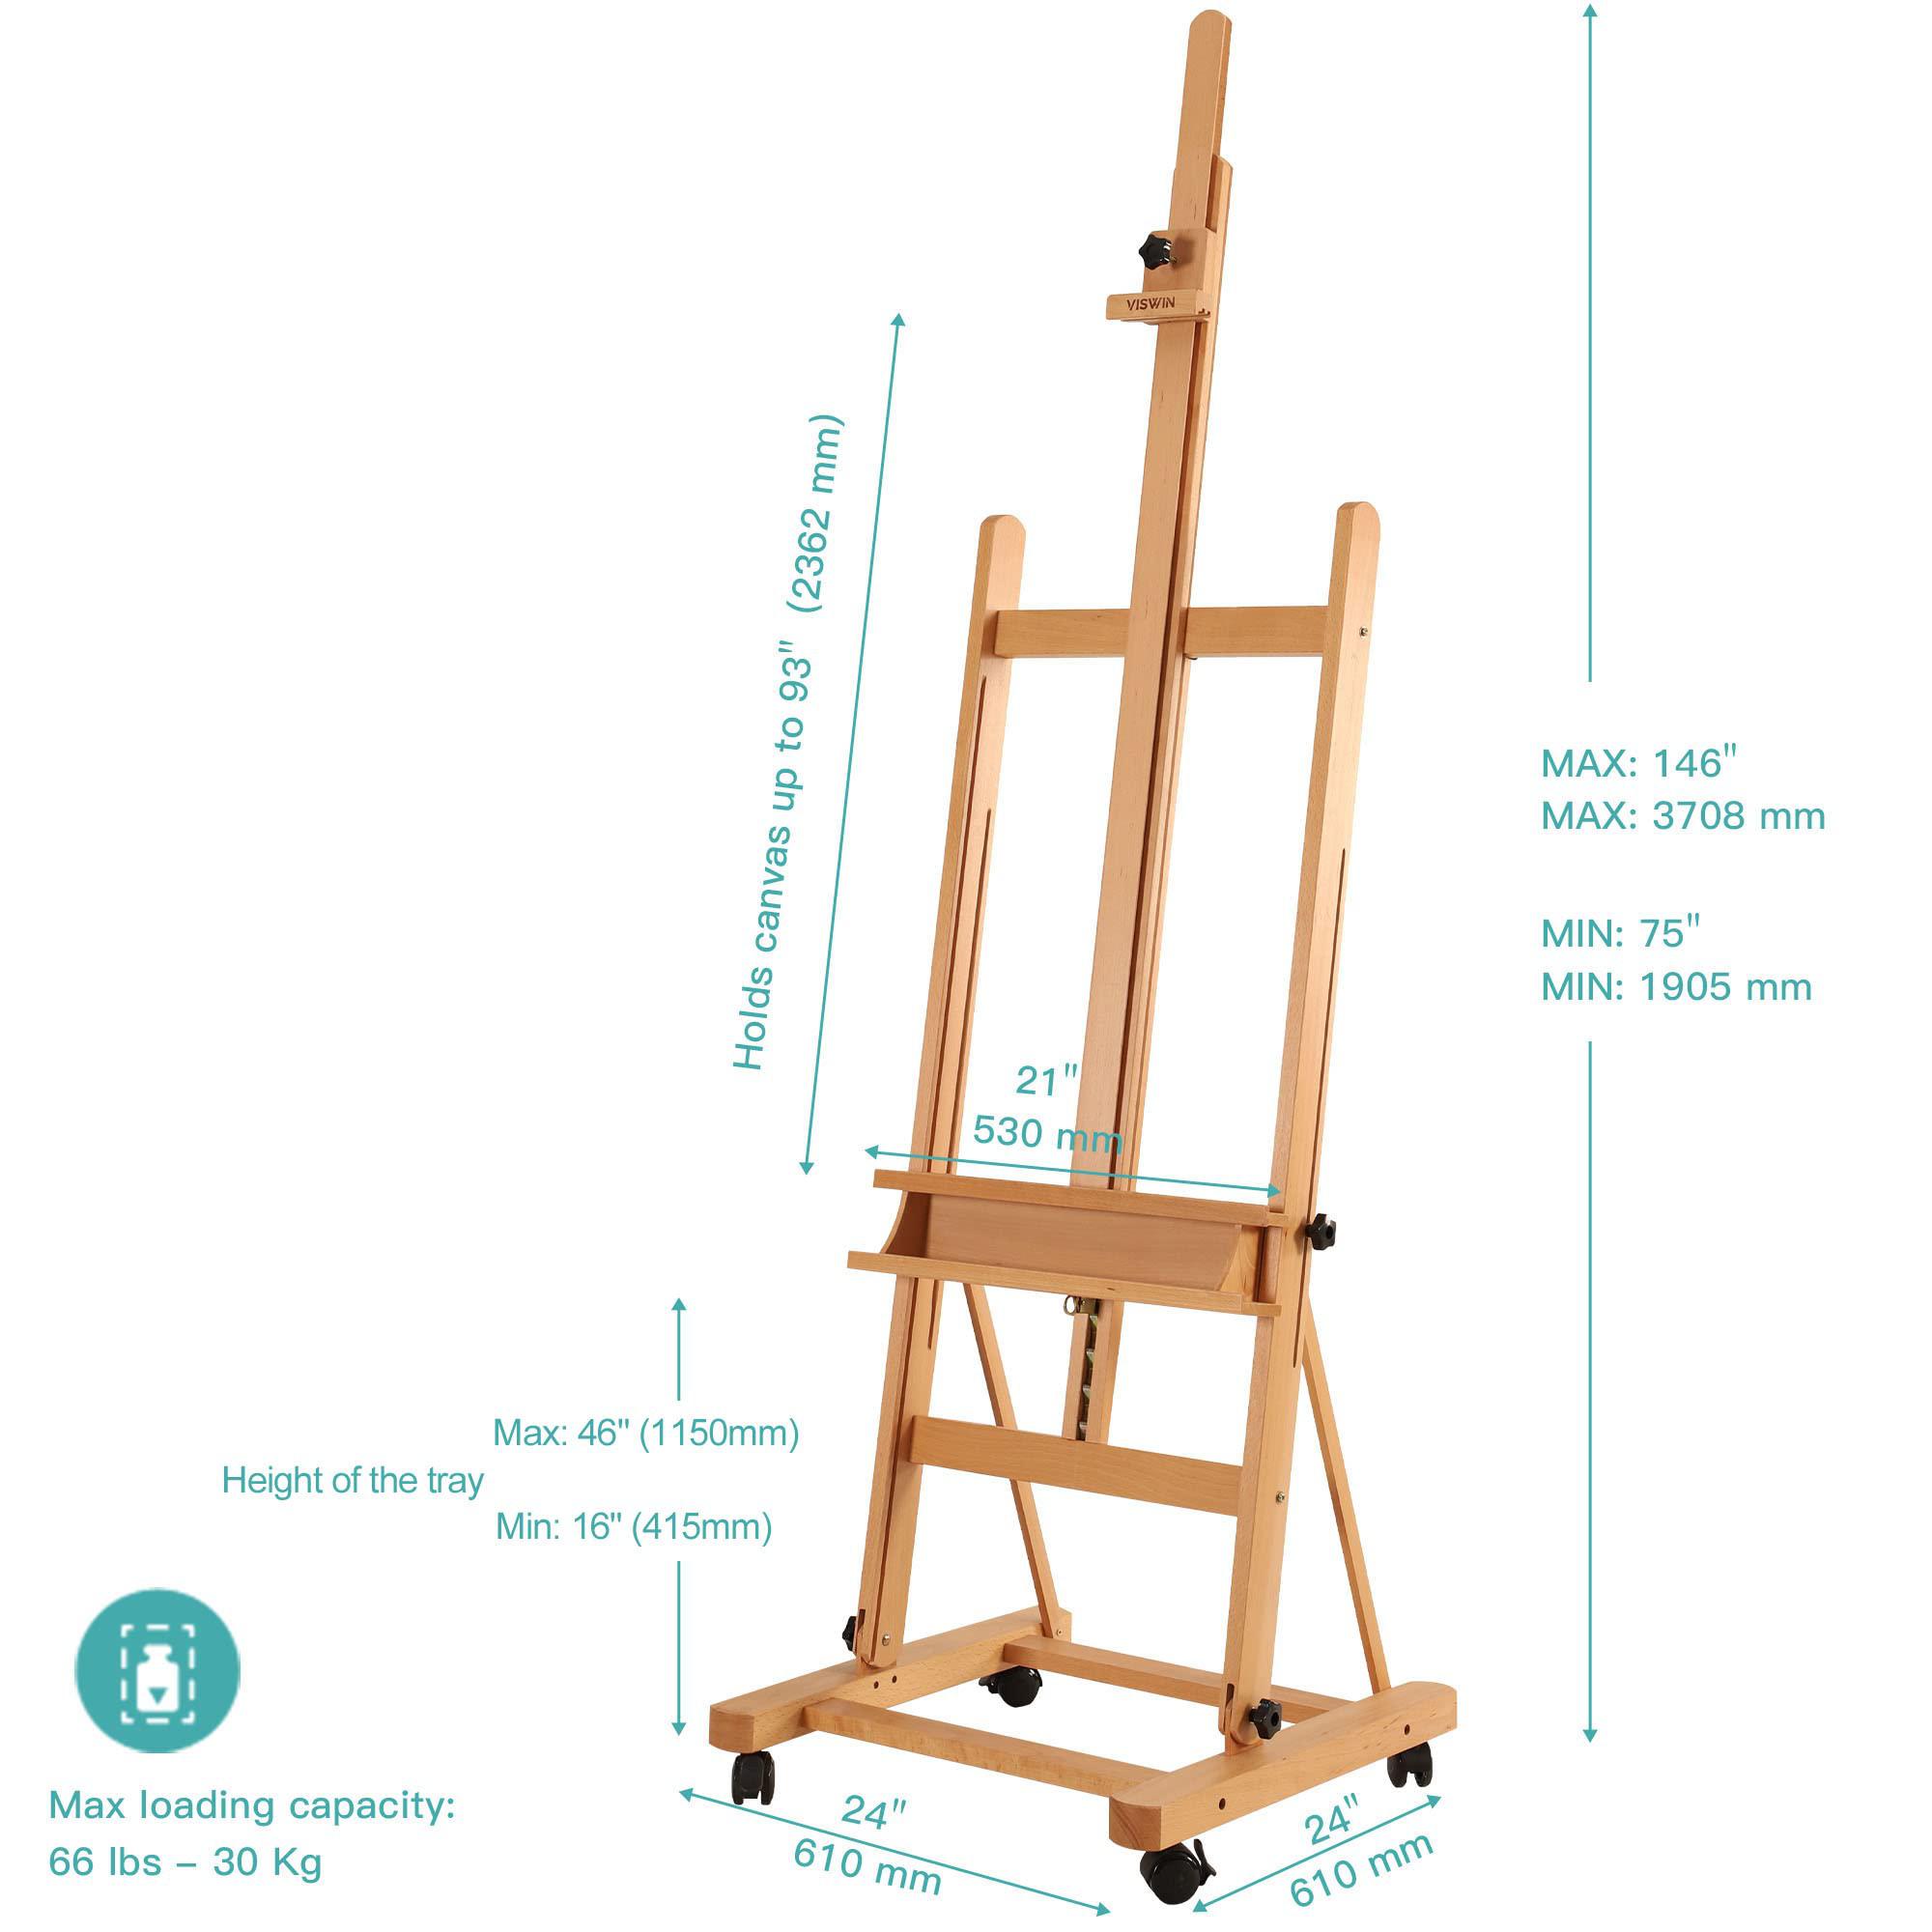 viswin premium h frame easel 75" to 146"h, hold canvas to 93", solid beech wood large artist easel for painting canvas, studi